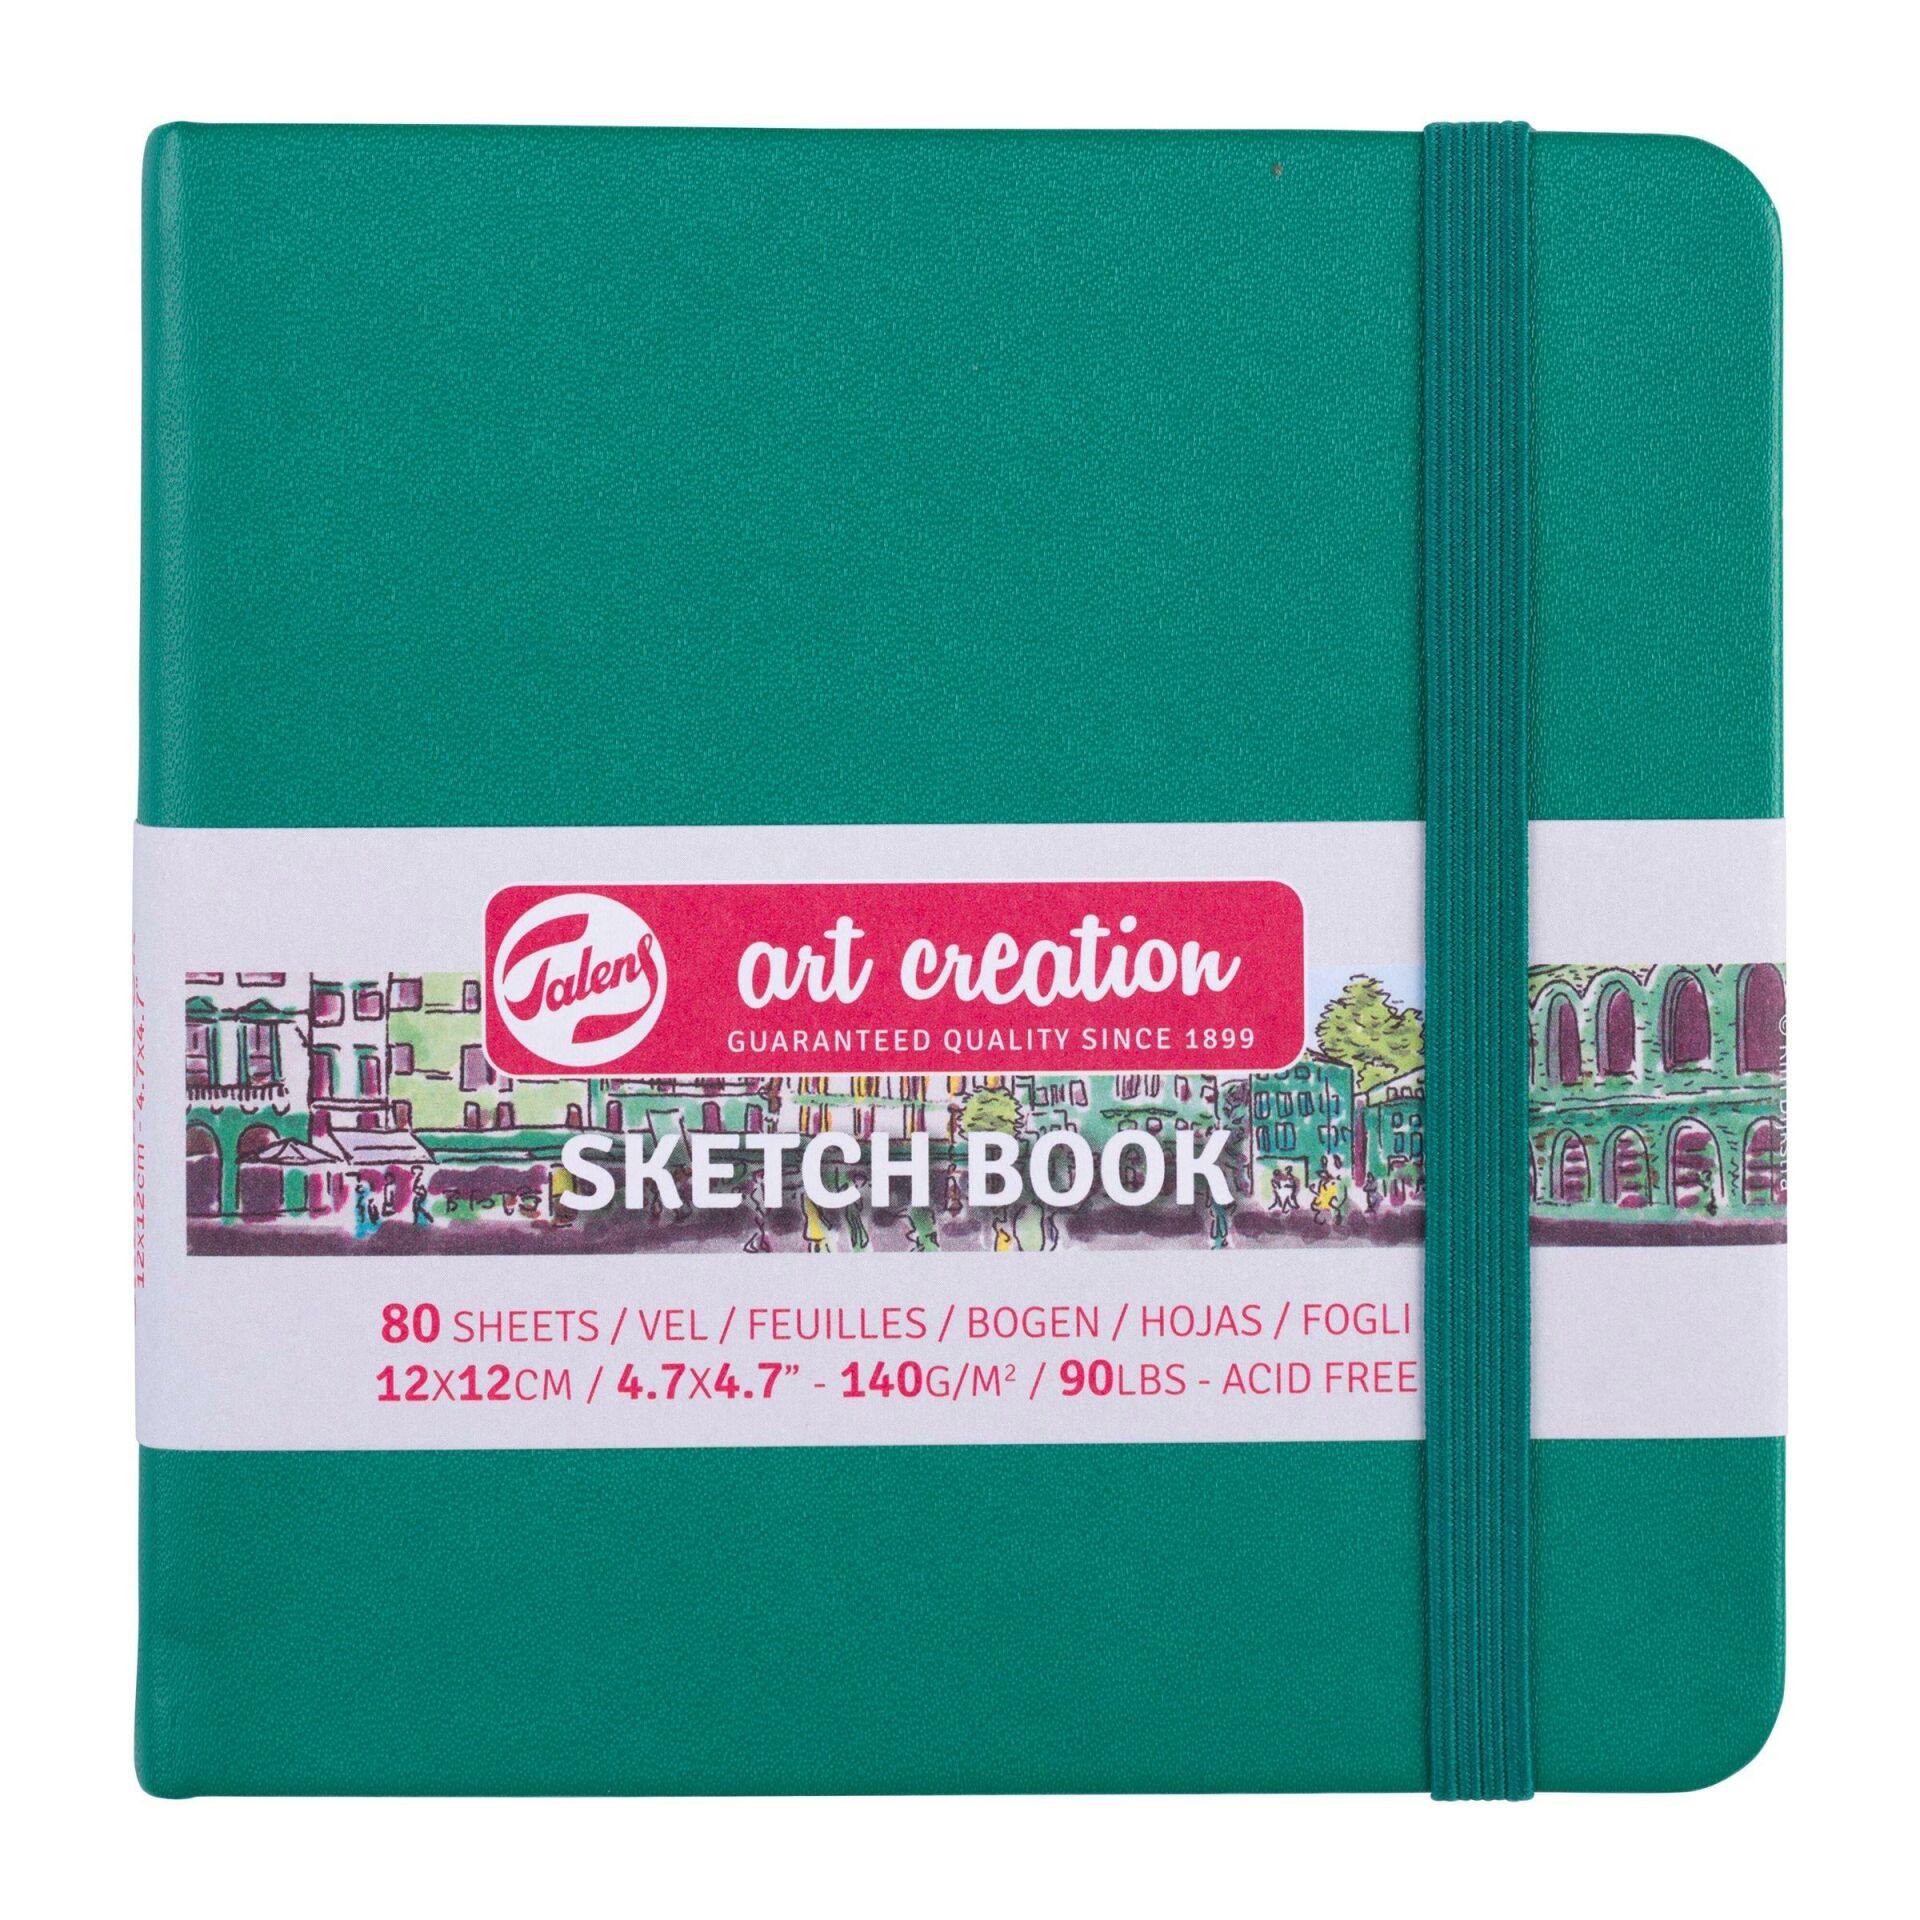 SKETCH BOOK FOREST GREEN 12X12